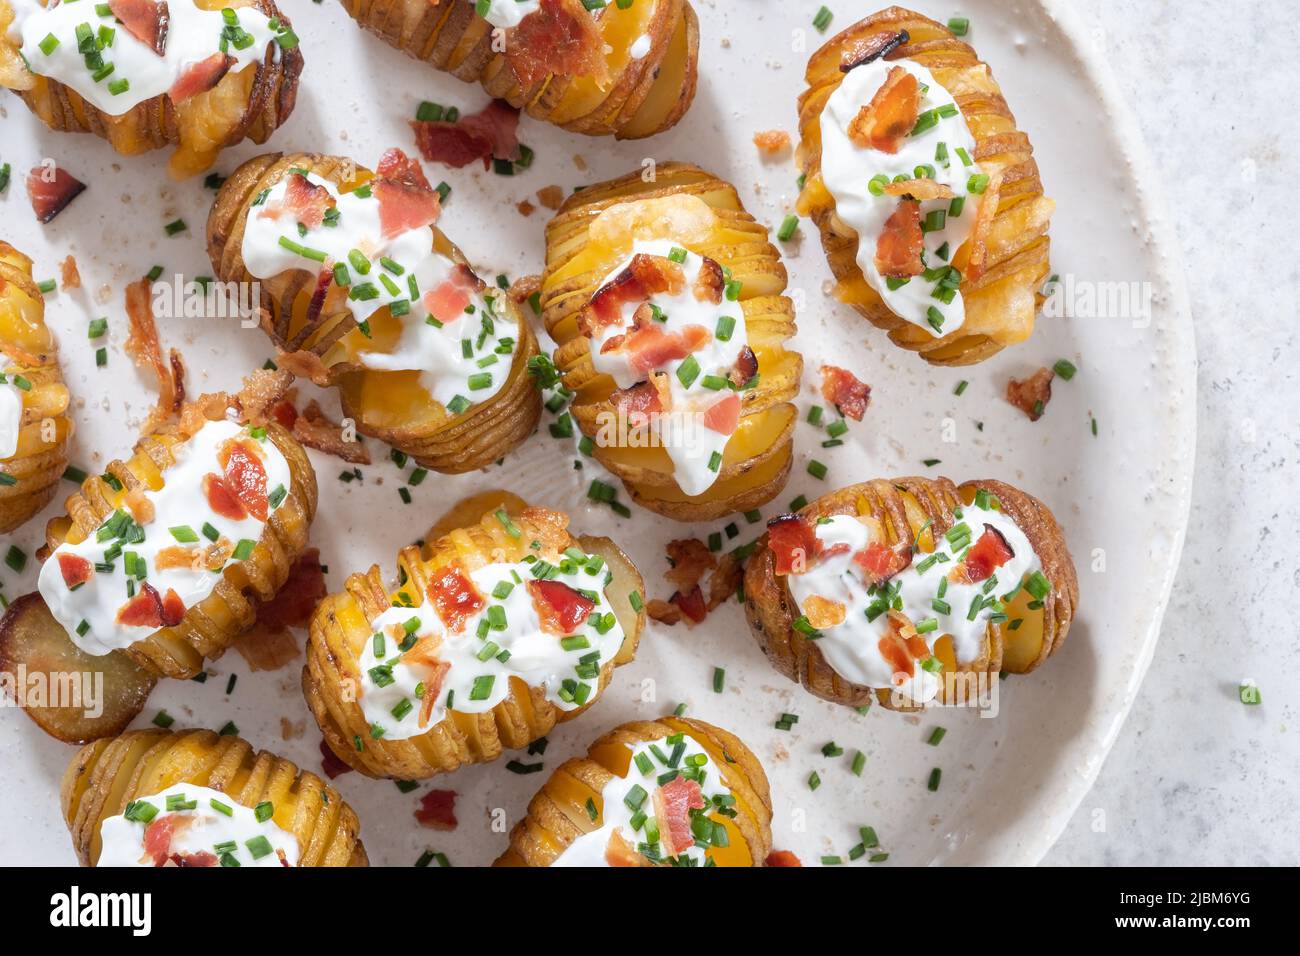 baked potato stuffed with cheese, bacon and sour cream. loaded hasselback potatoes Stock Photo